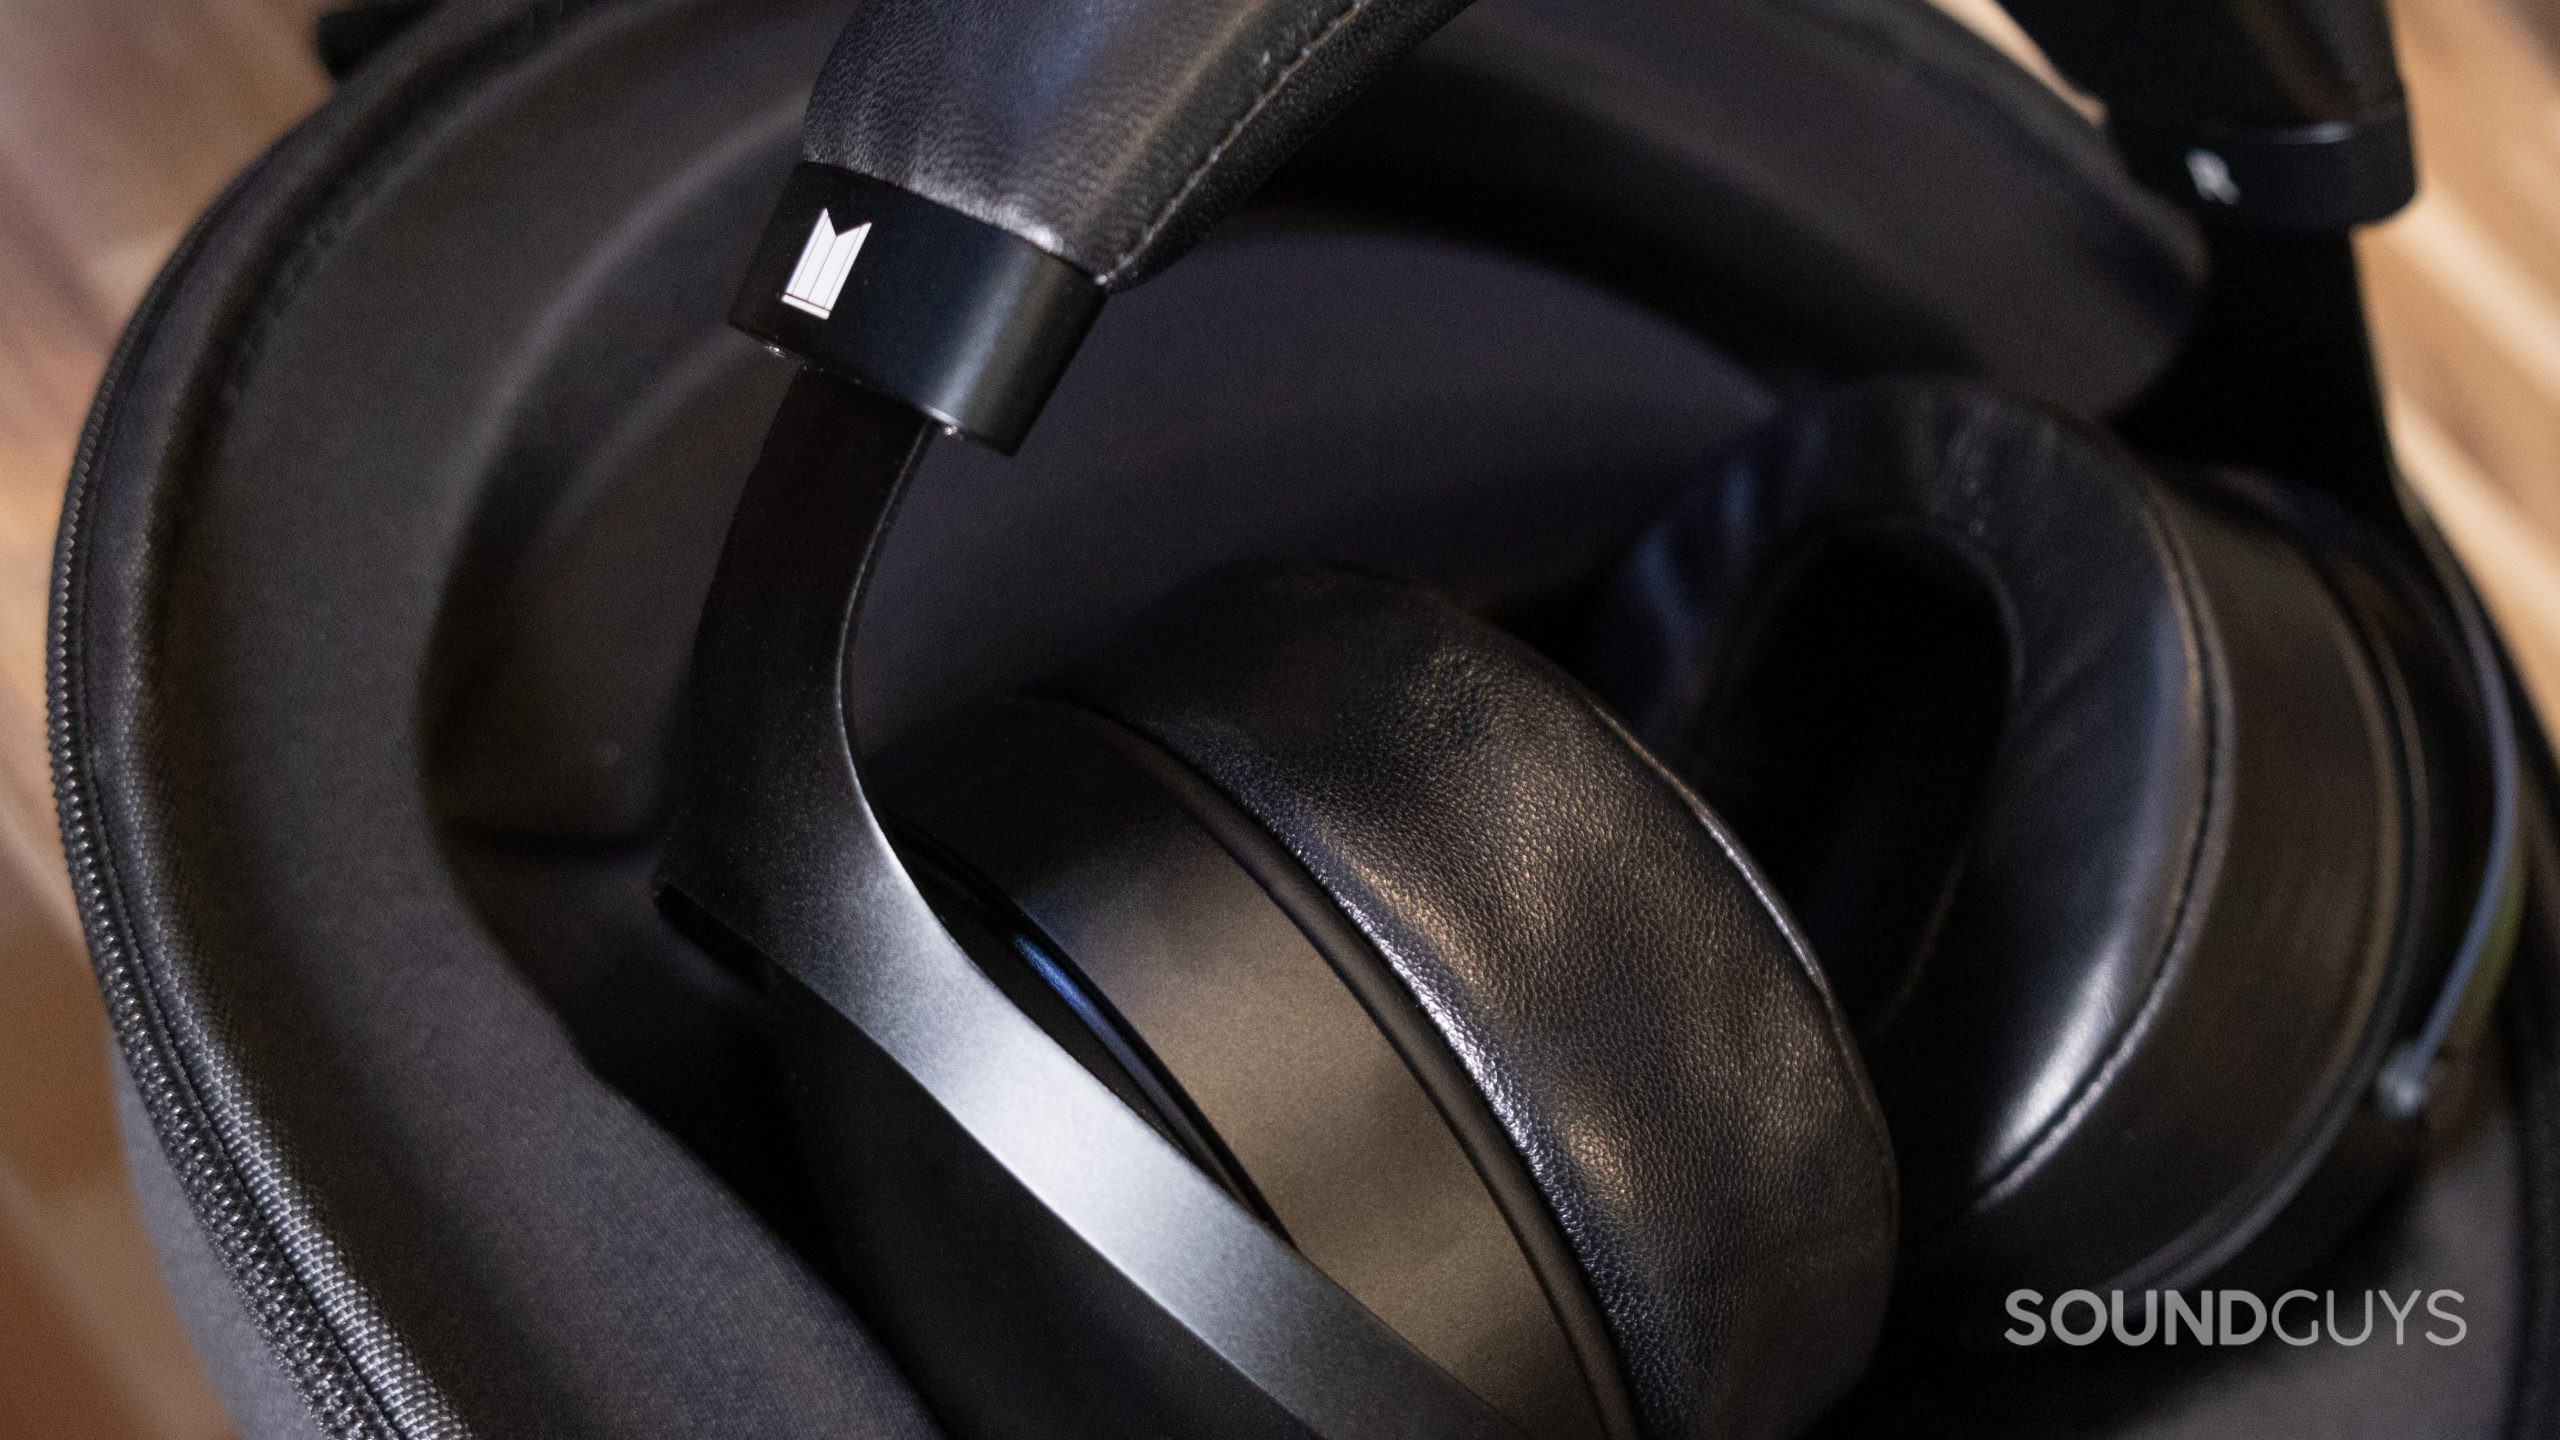 The Monolith by Monoprice M1070C stands up inside the molded case.